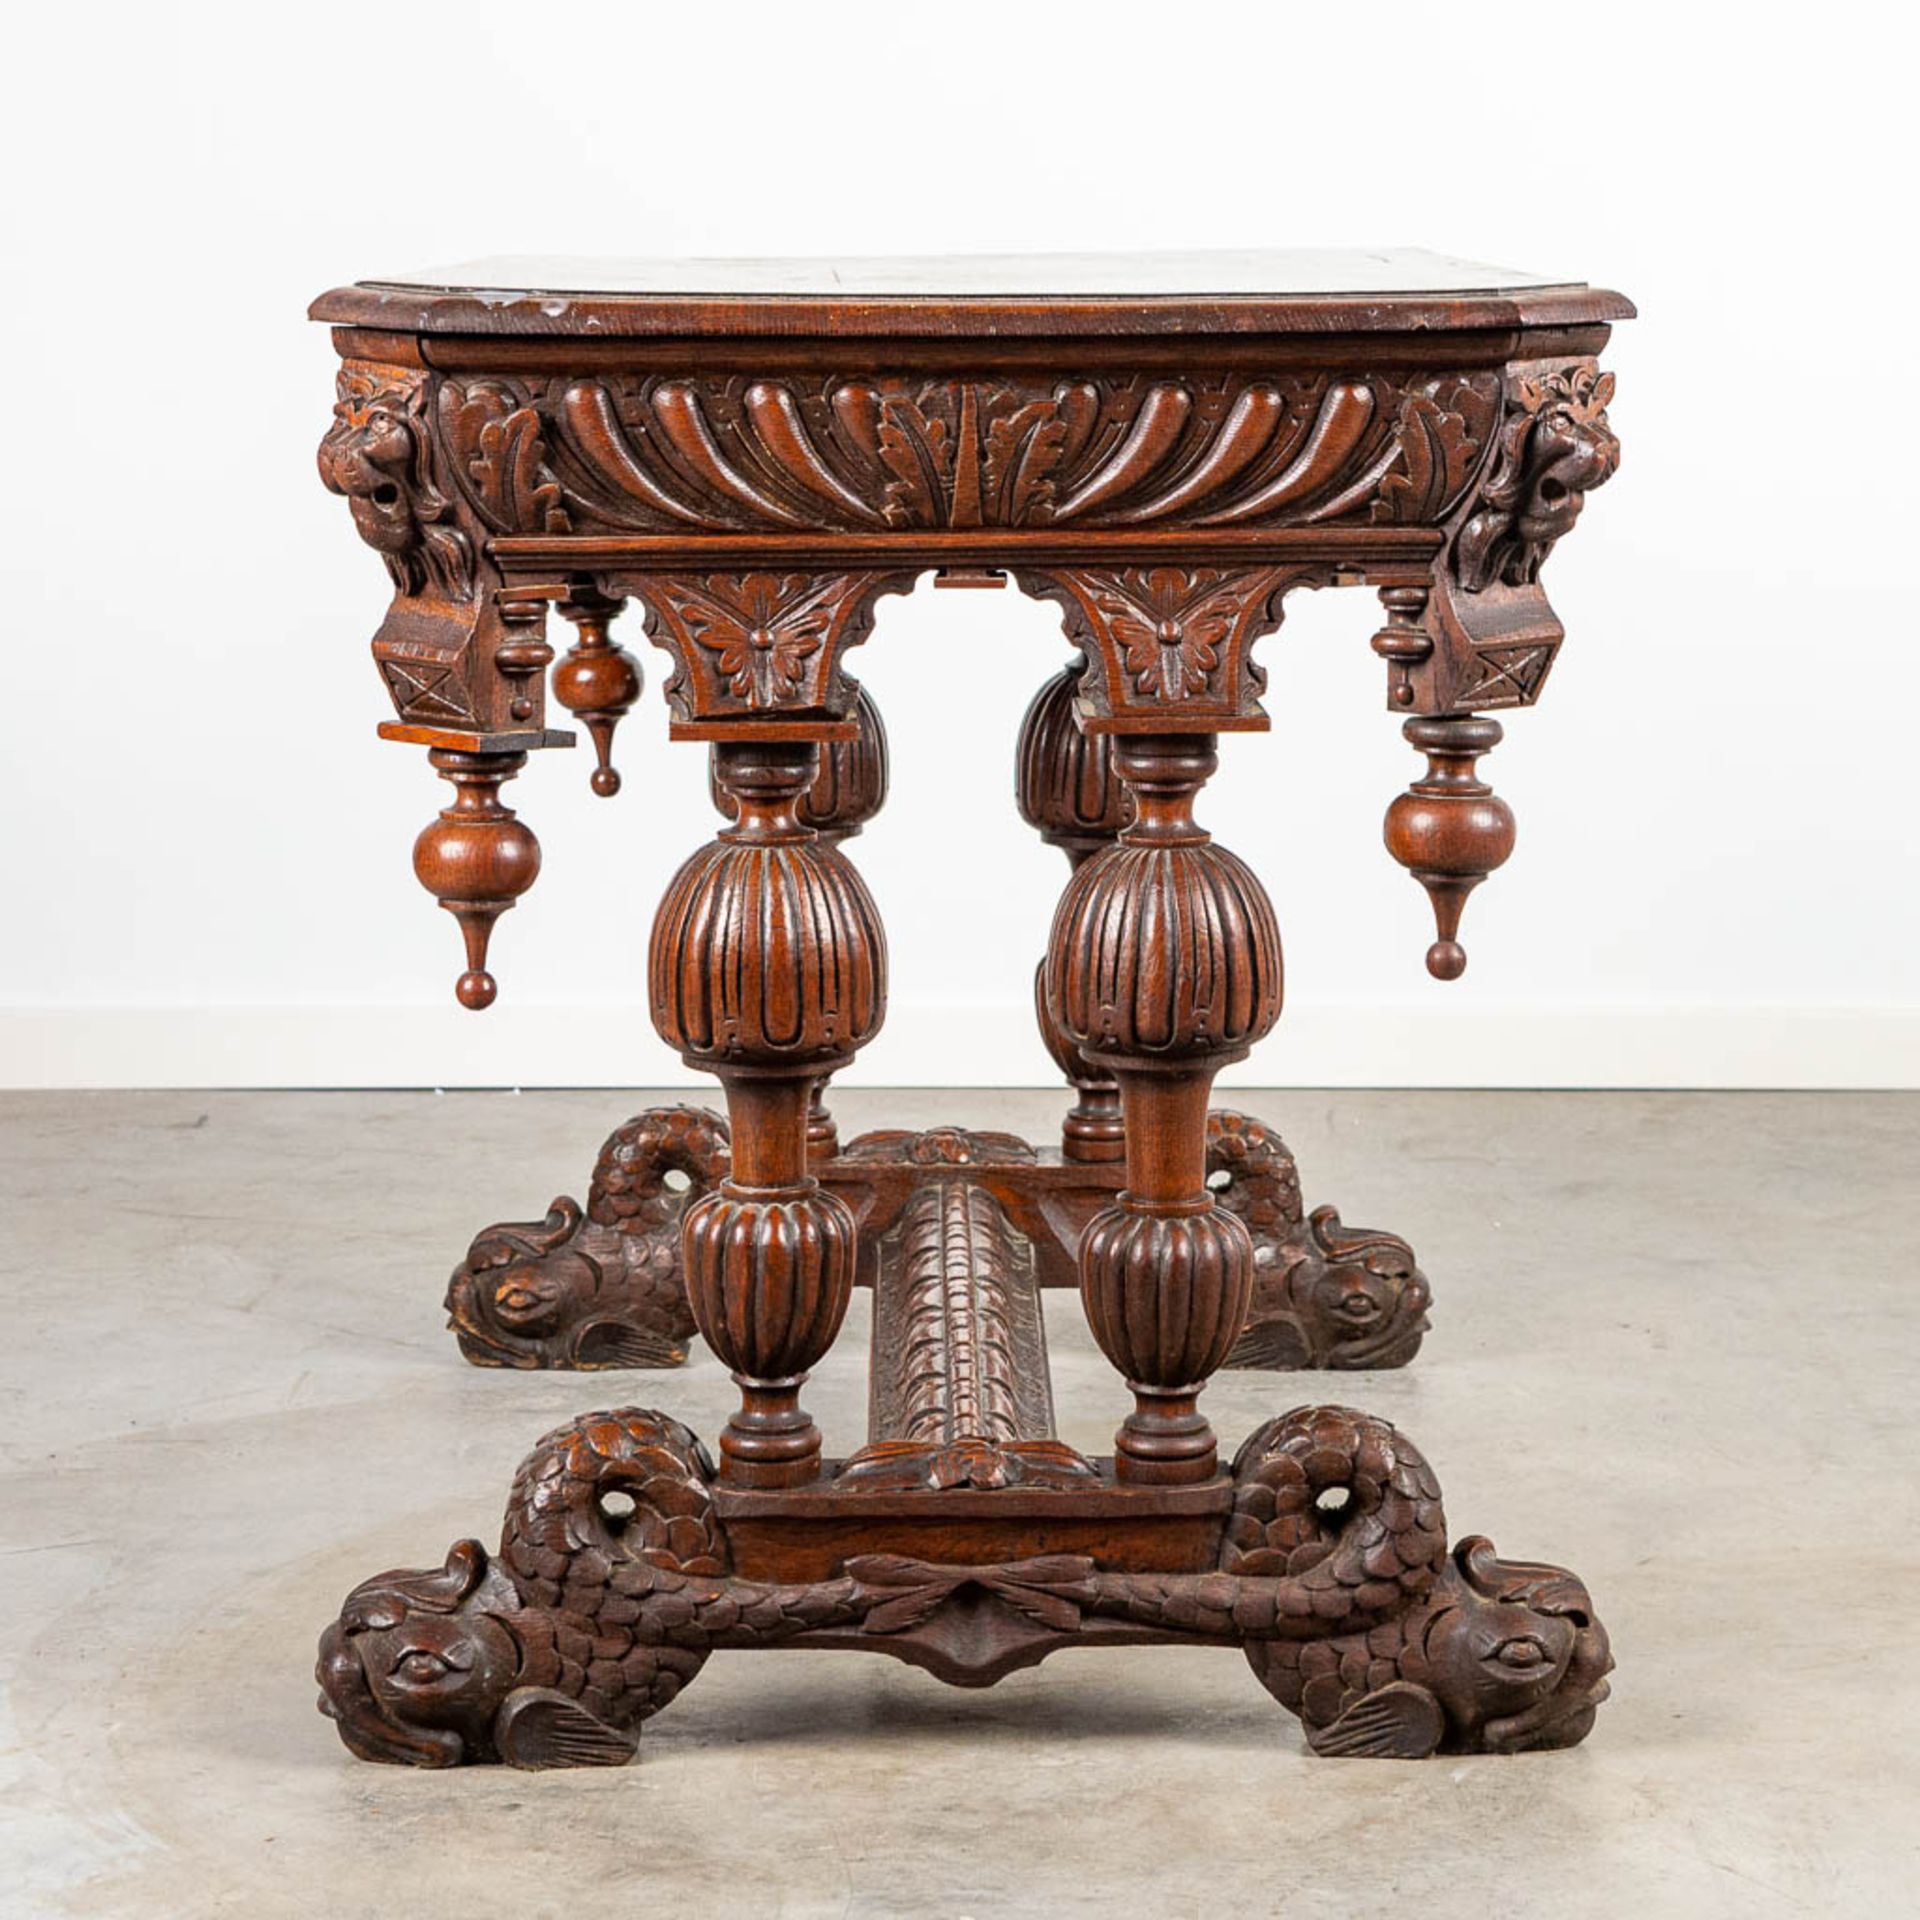 A desk made of oak and decorated with wood sculptured Dolphins. - Image 5 of 9